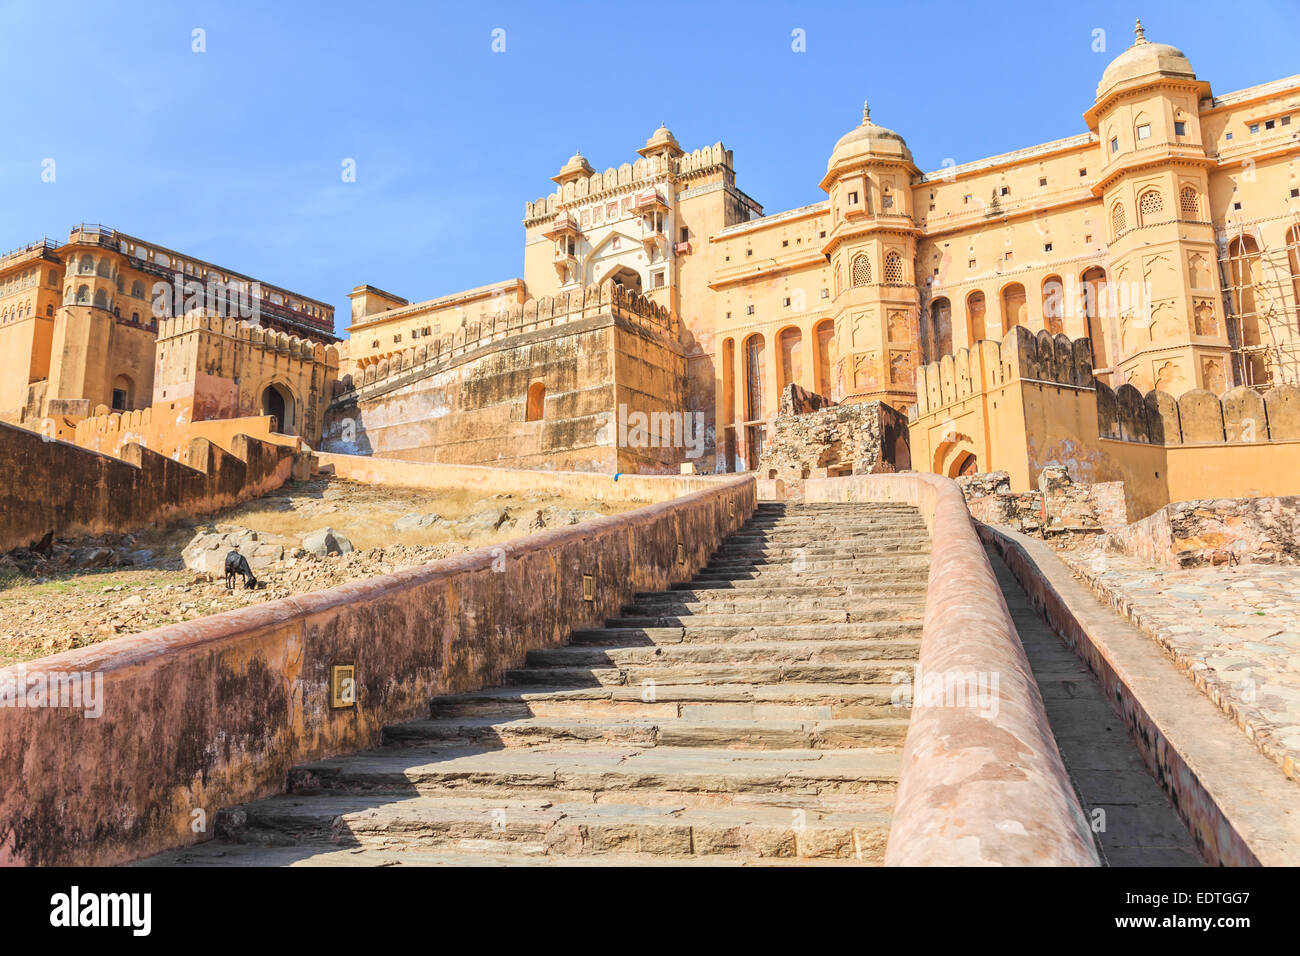 Forte Amber o Forte Amer situato a Jaipur, stato del Rajasthan, India Foto Stock